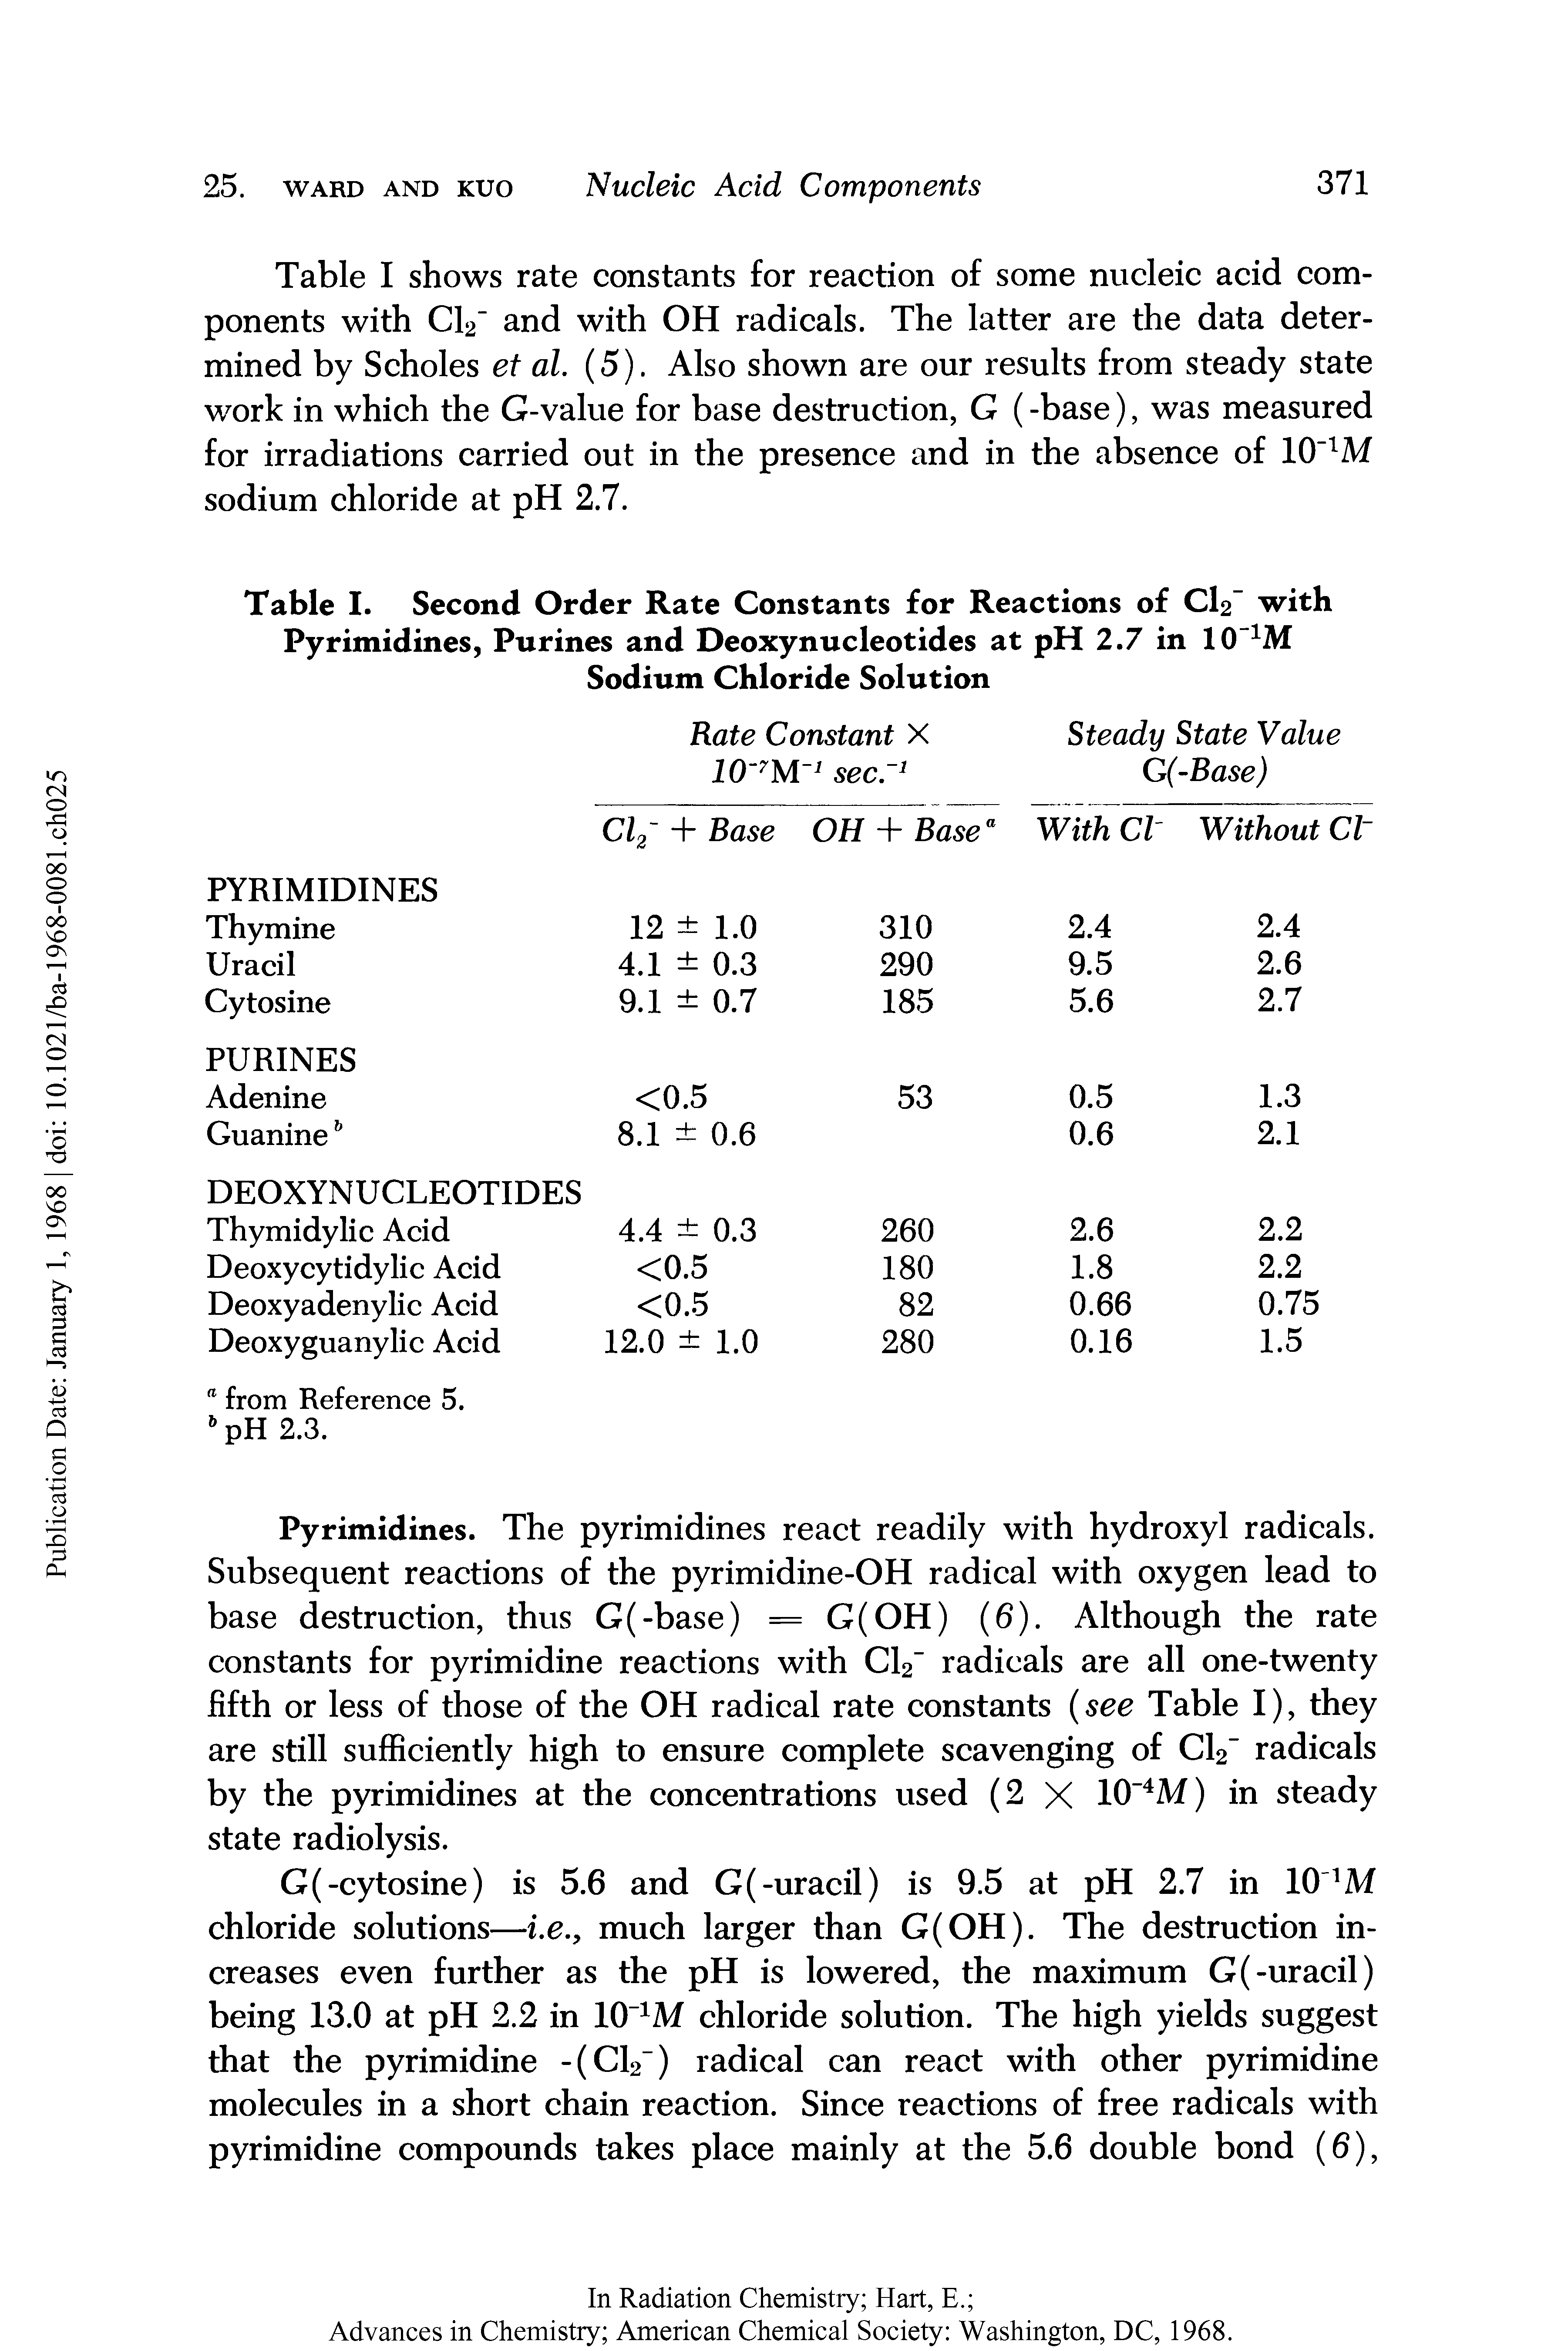 Table I. Second Order Rate Constants for Reactions of Cl2 with Pyrimidines, Purines and Deoxynucleotides at pH 2.7 in 10-1M Sodium Chloride Solution...